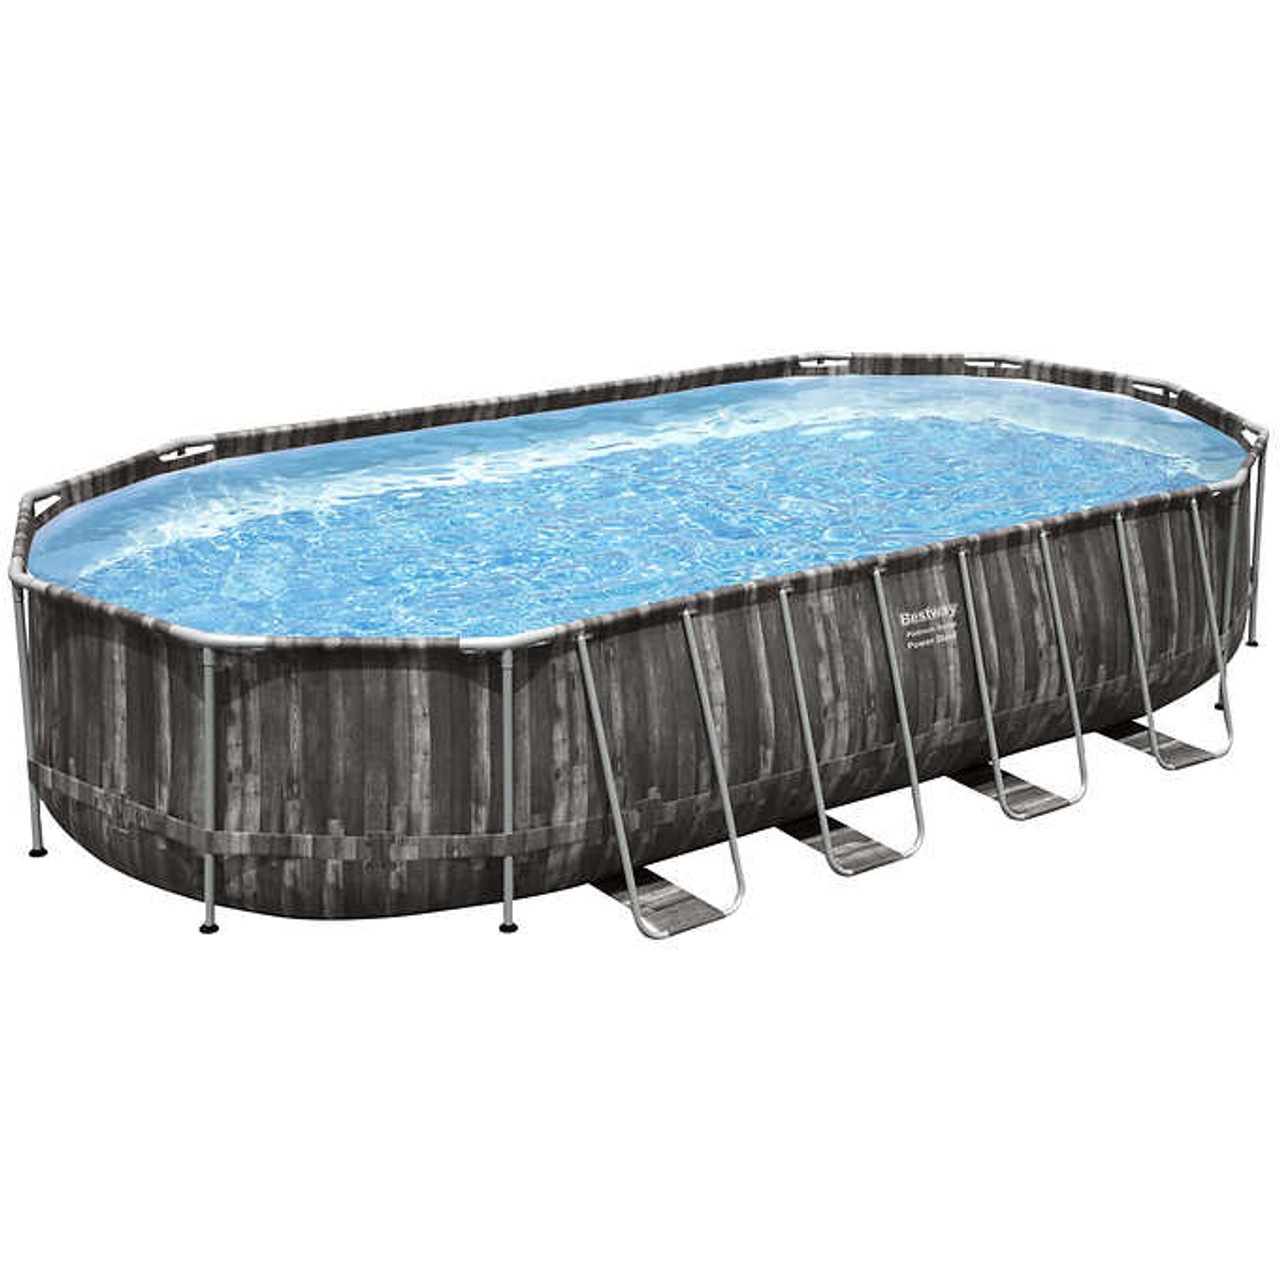 Bestway Power Steel 6.71m (22 ft.) Oval Above-ground Pool with Solar Heater - Chicken Pieces